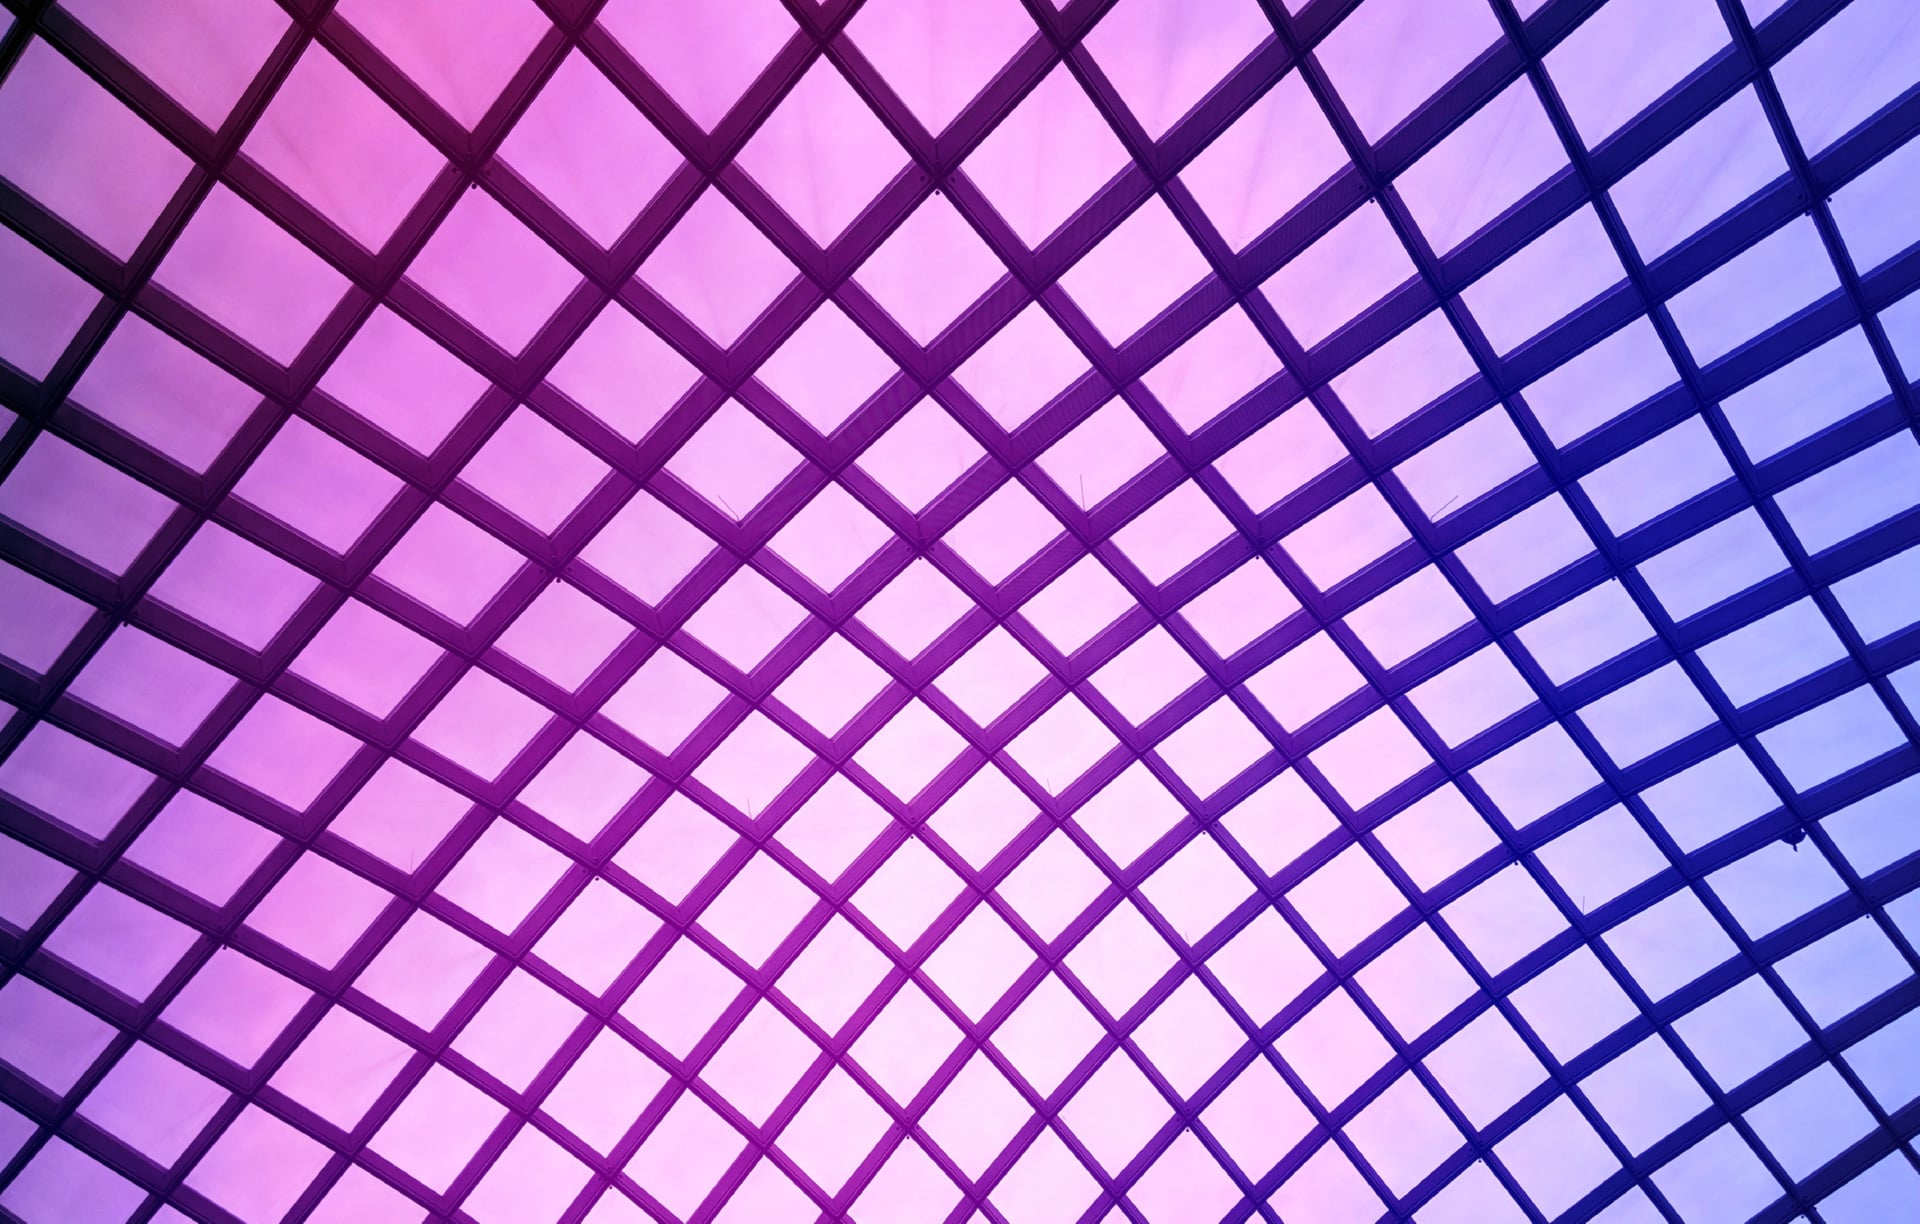 Mesh Illustration wallpapers HD quality